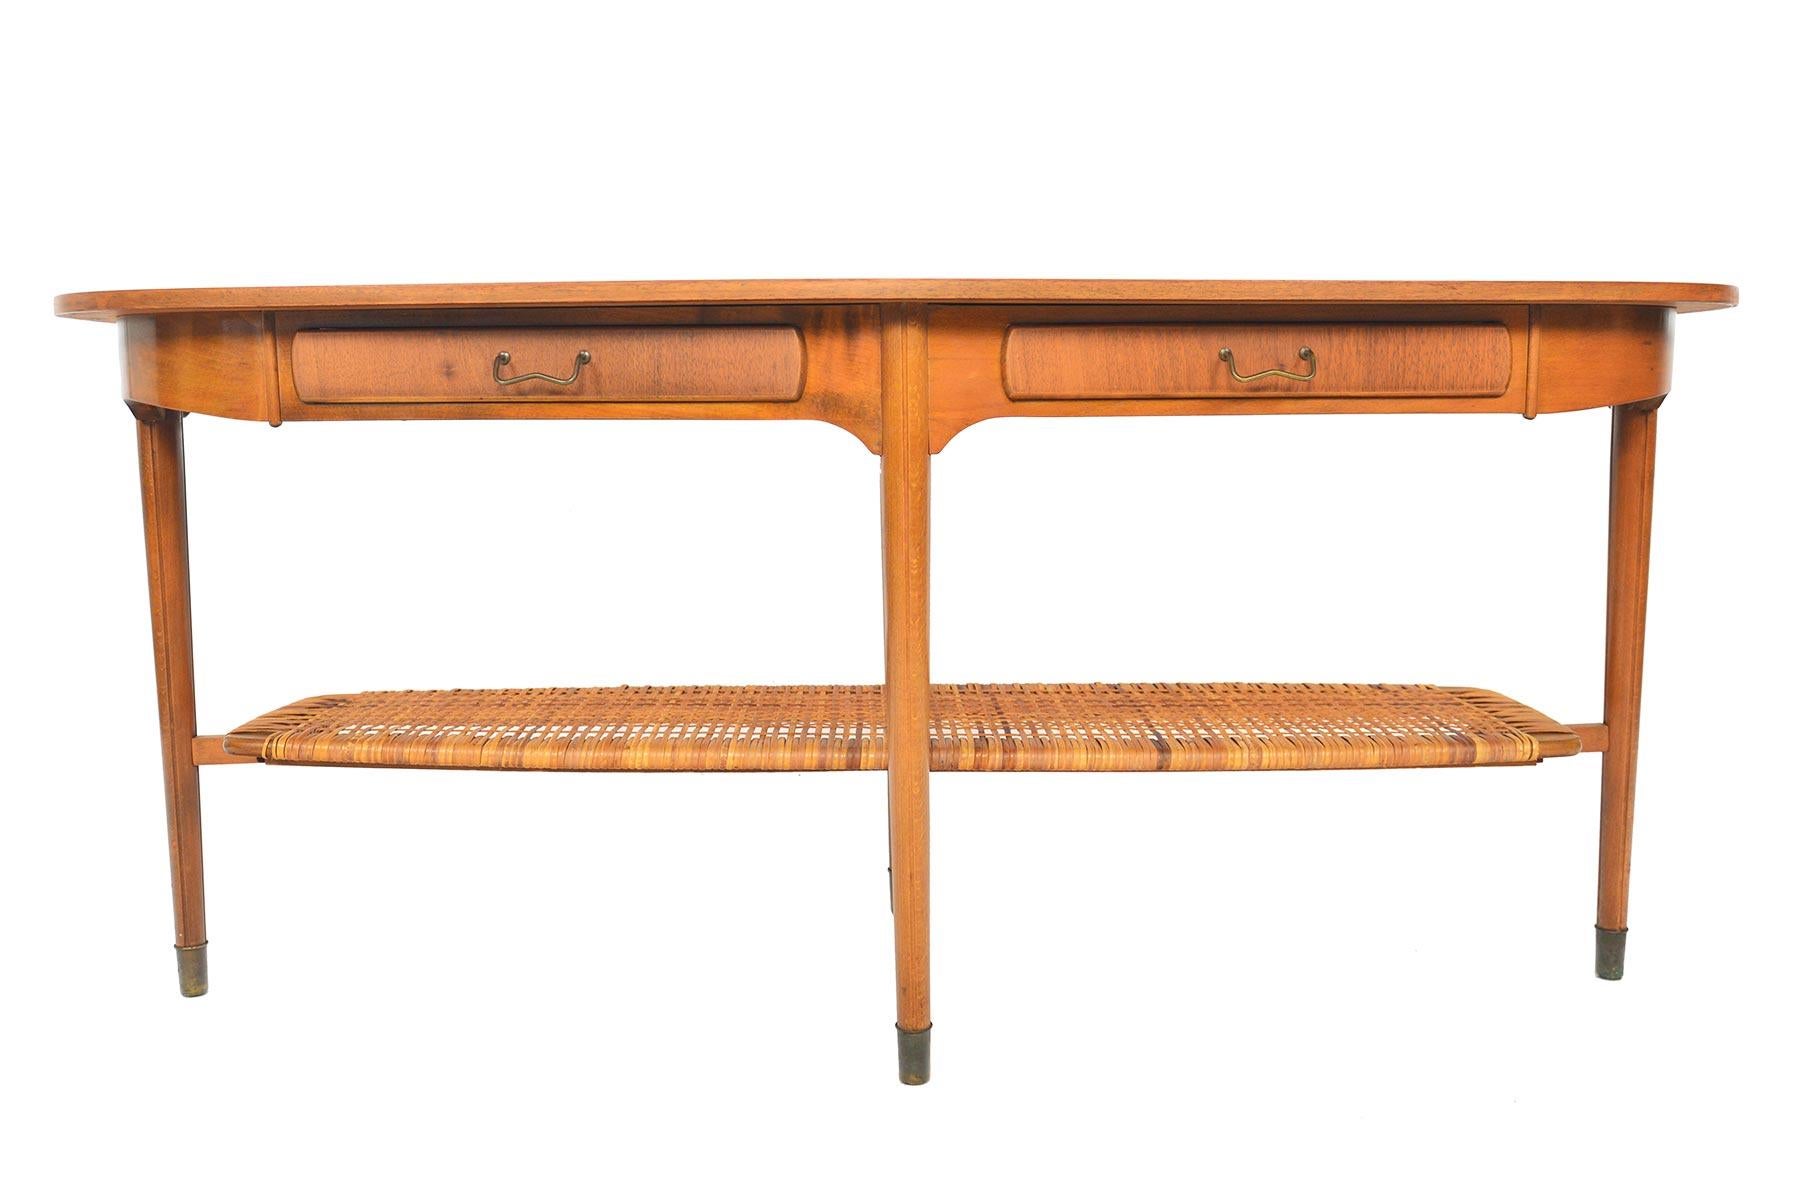 This gorgeous Danish modern walnut coffee table hails from the 1950s. Offering traditional detailing in a modern silhouette, this table offers elegance and exceptional storage! The walnut tabletop houses two drawers with brass pulls. The unique four